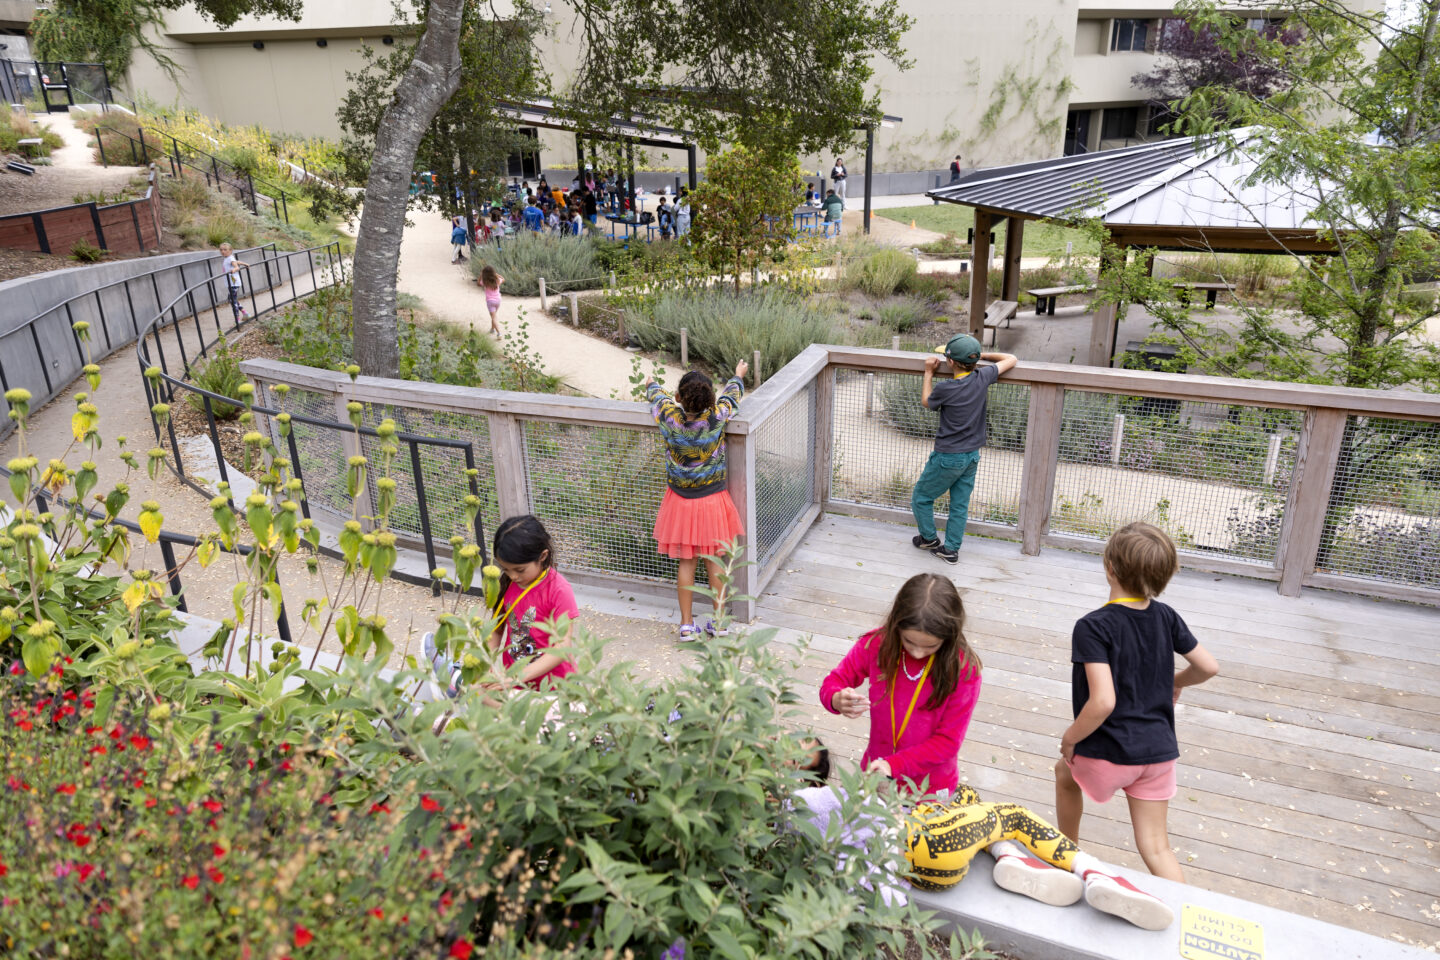 Children and visitors enjoy being in nature in the Outdoor Nature Lab